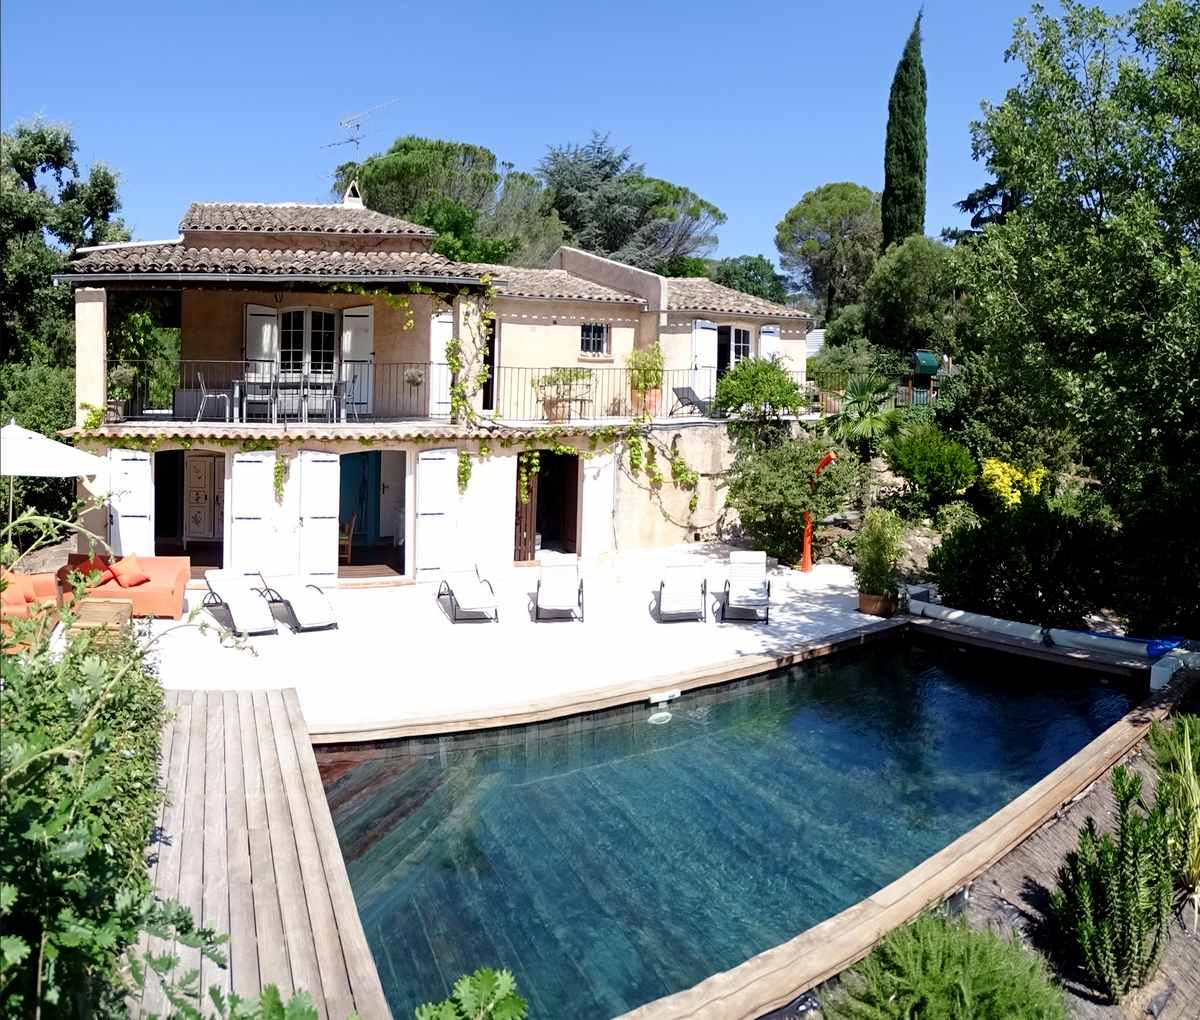 Exceptional villa,A villa not overlooked with pool Saint Raphael France.